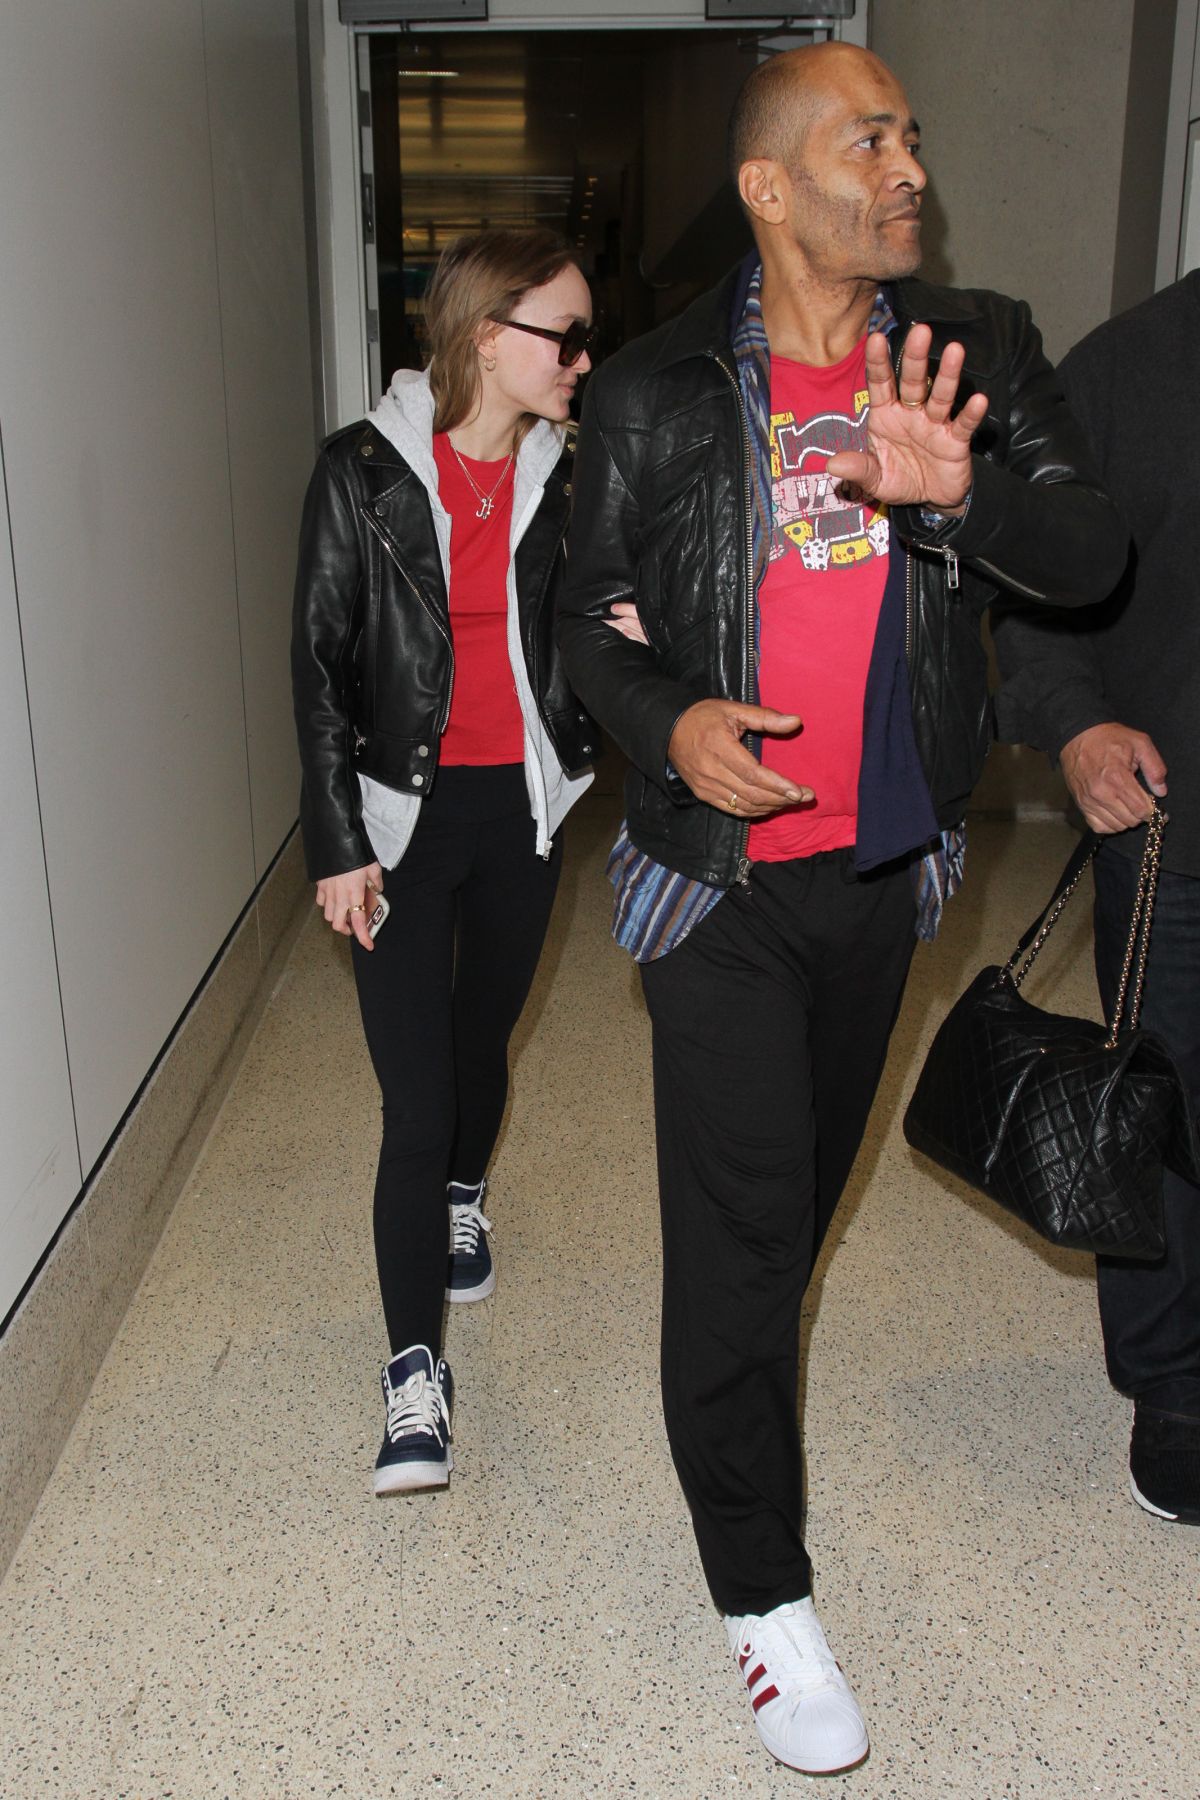 LILY-ROSE DEPP at LAX Airport in Los Angeles 02/21/2017 – HawtCelebs